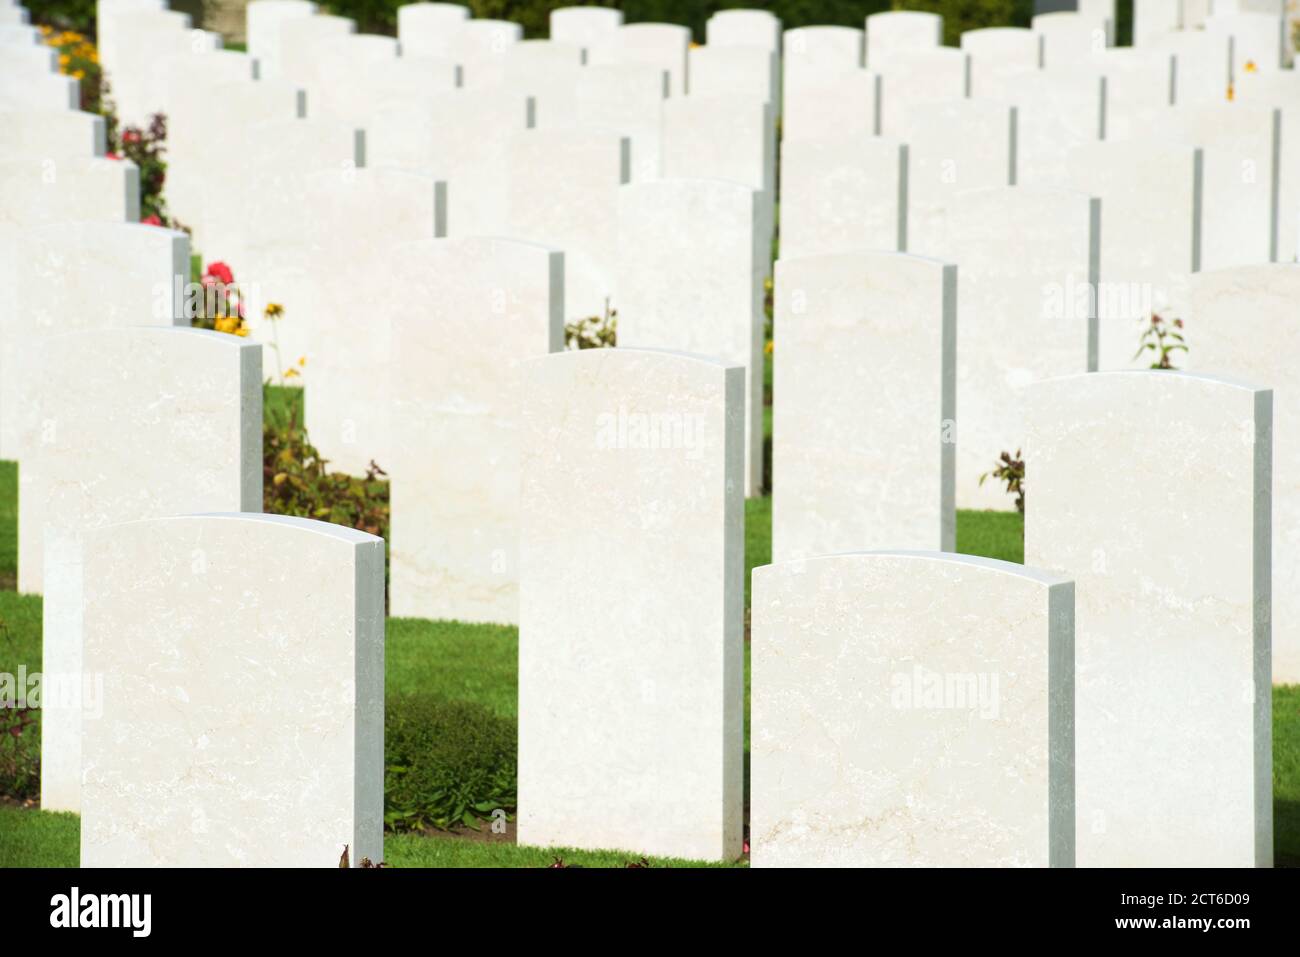 Bayeux, France - August 20, 2014: Headstones lined up in the British cemetery Stock Photo